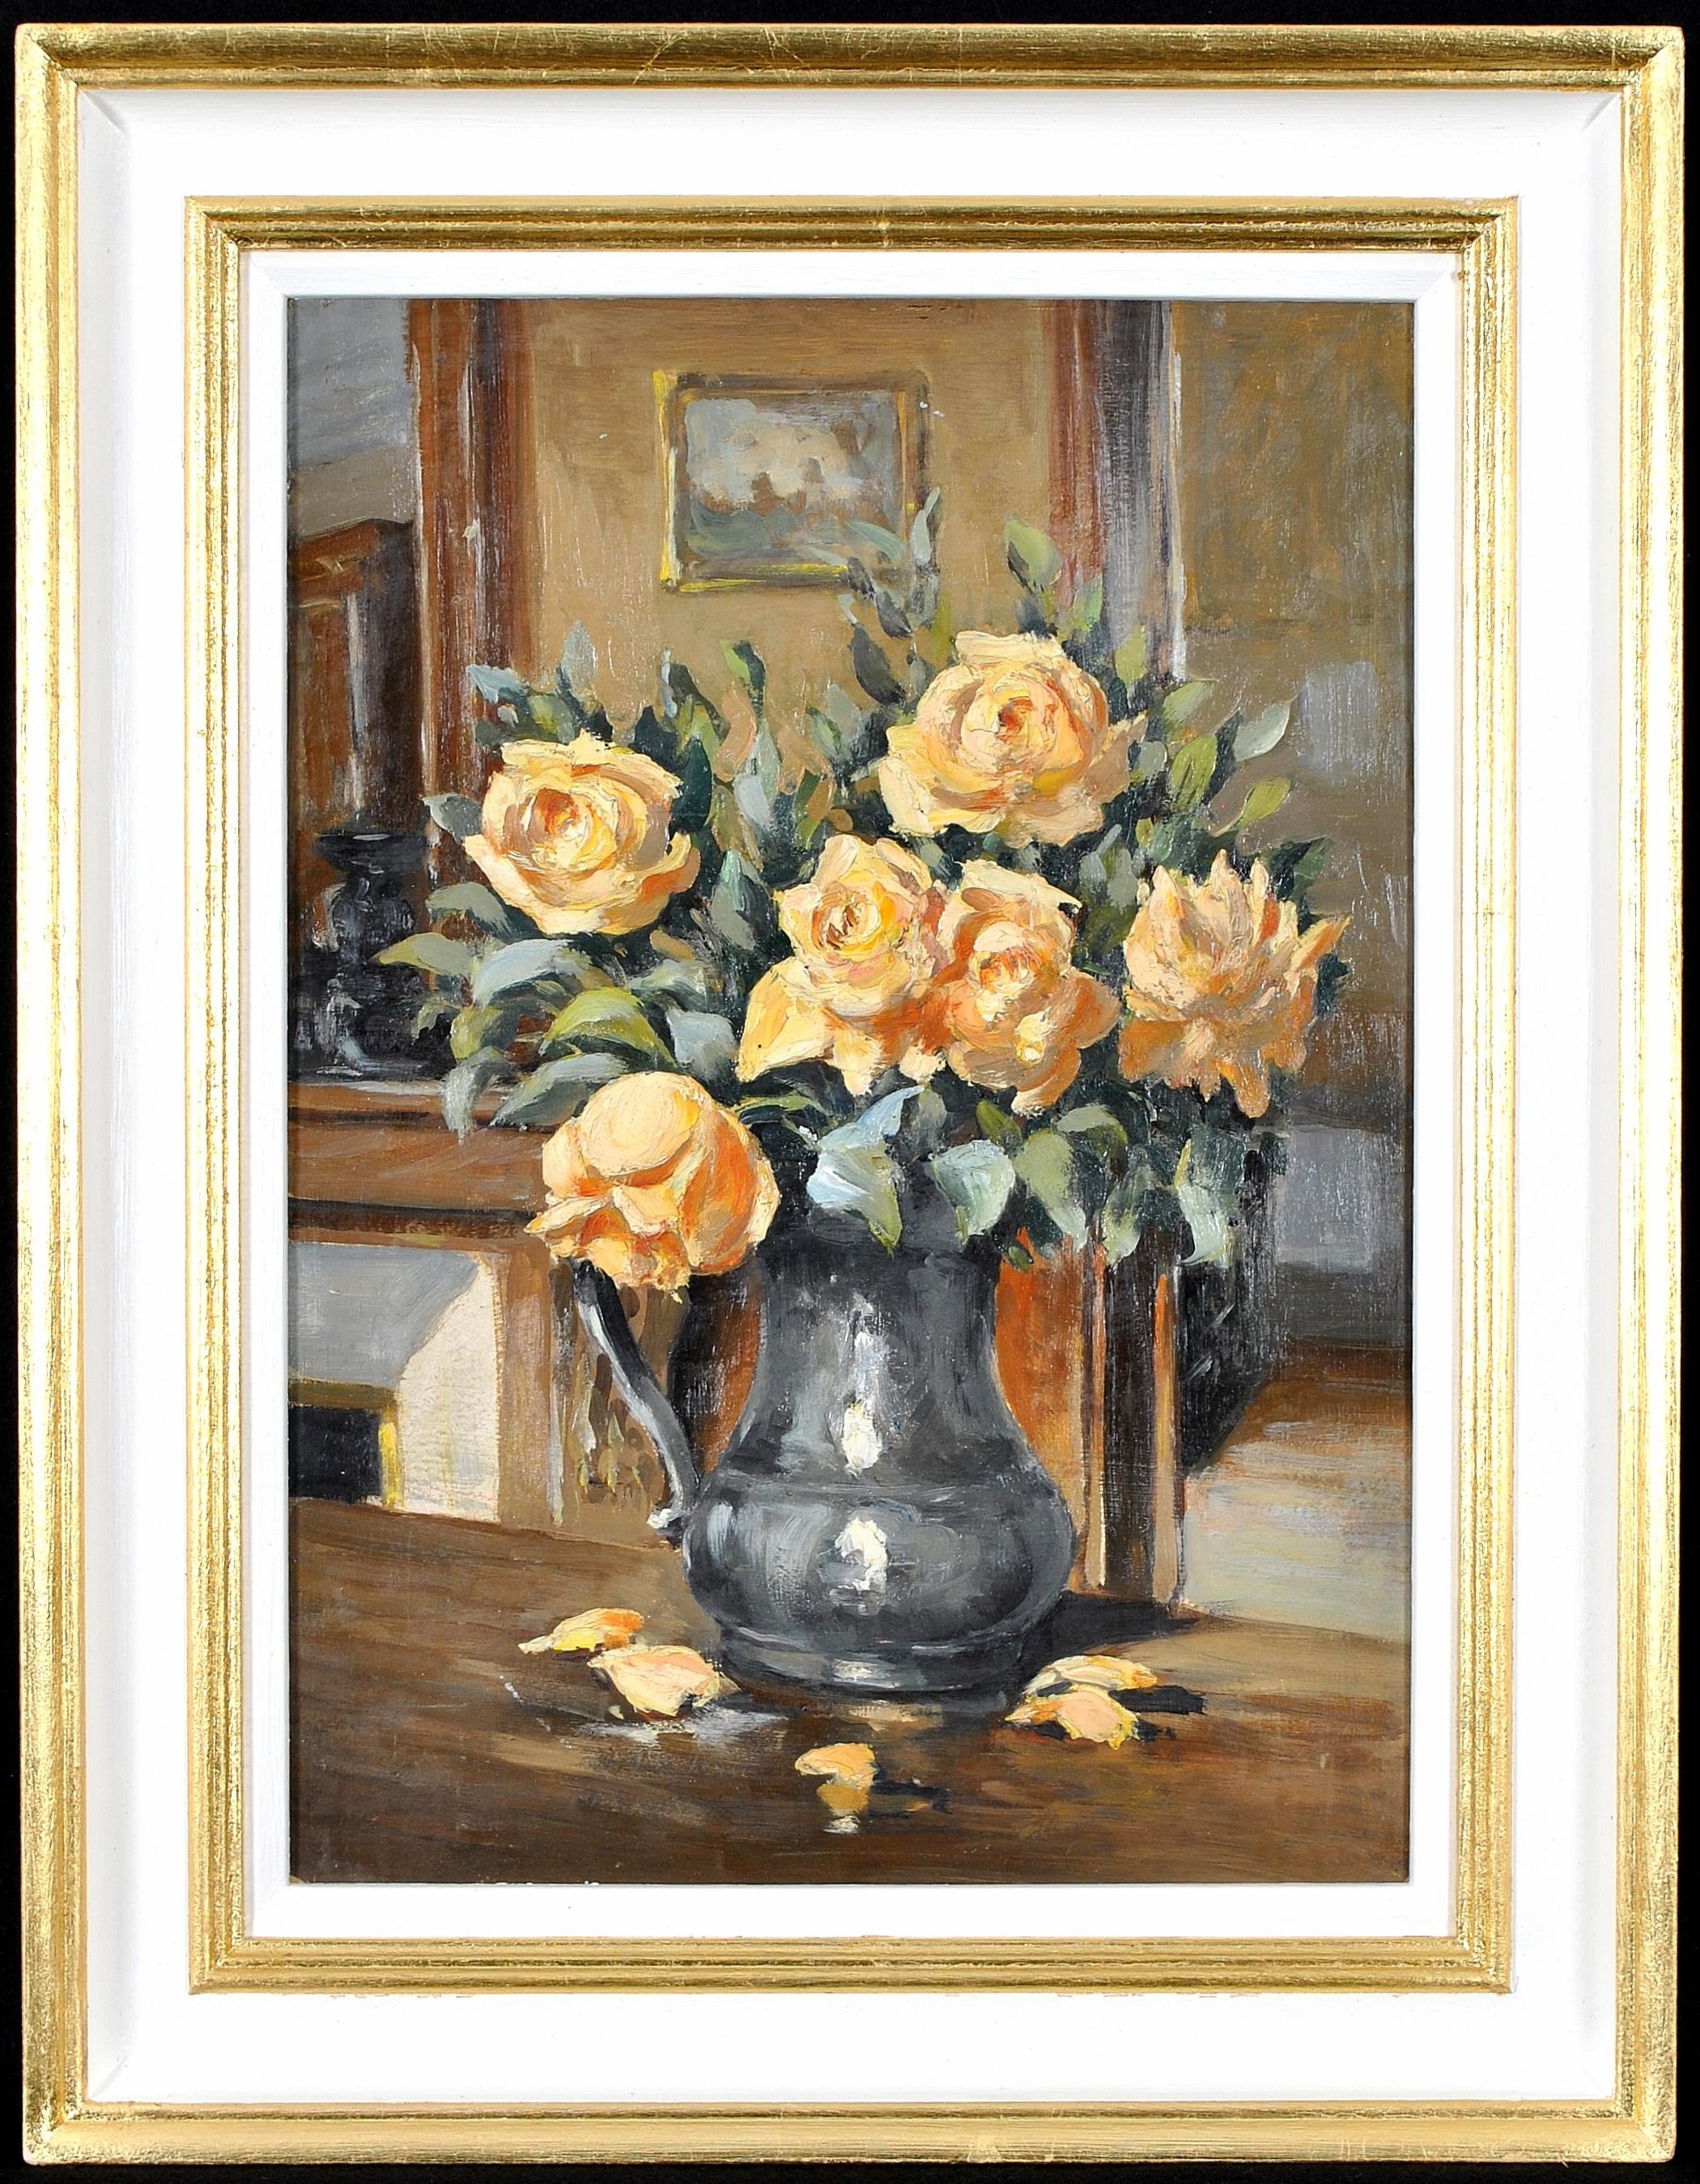 Roses in a Jug - 1920's French Impressionist Antique Still Life Oil Painting